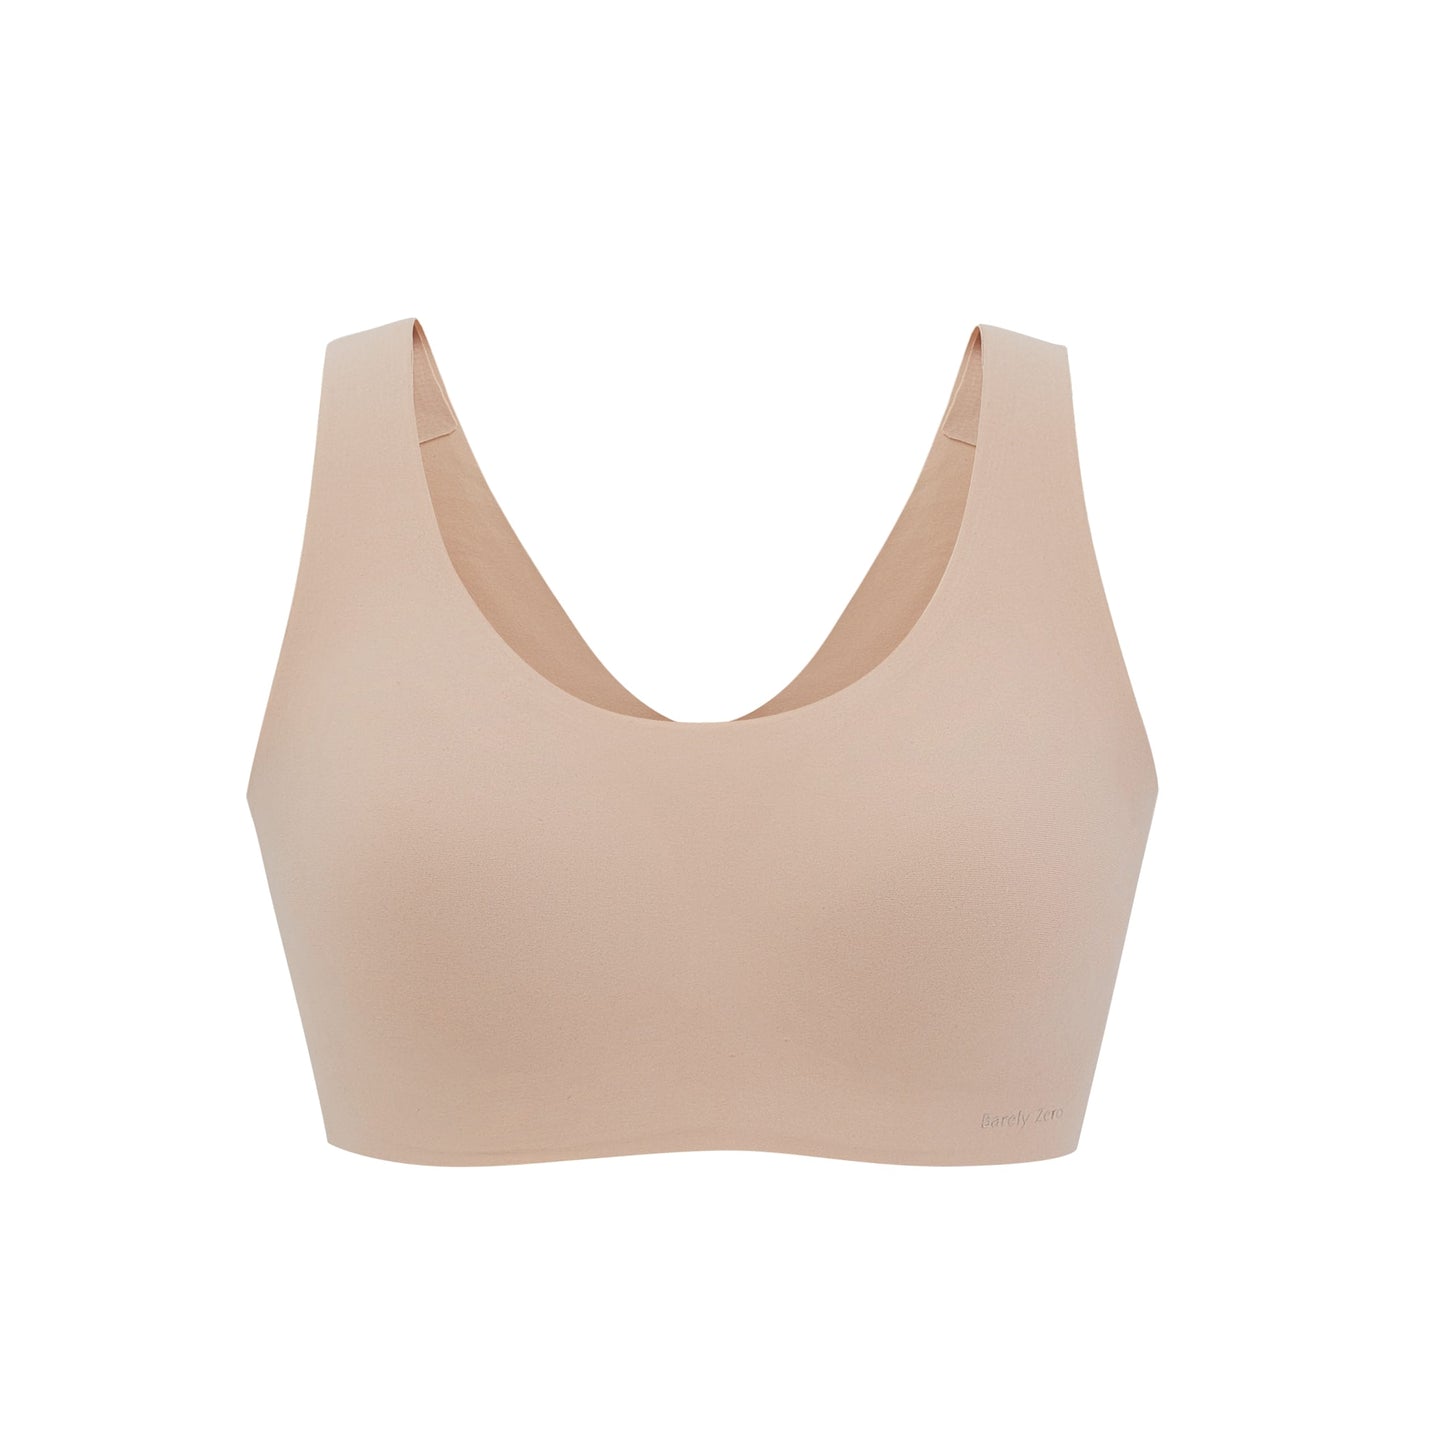 a flay lay image of a light nude Barely Zero Classic Bra, which is a pull-over style with thick stripes.